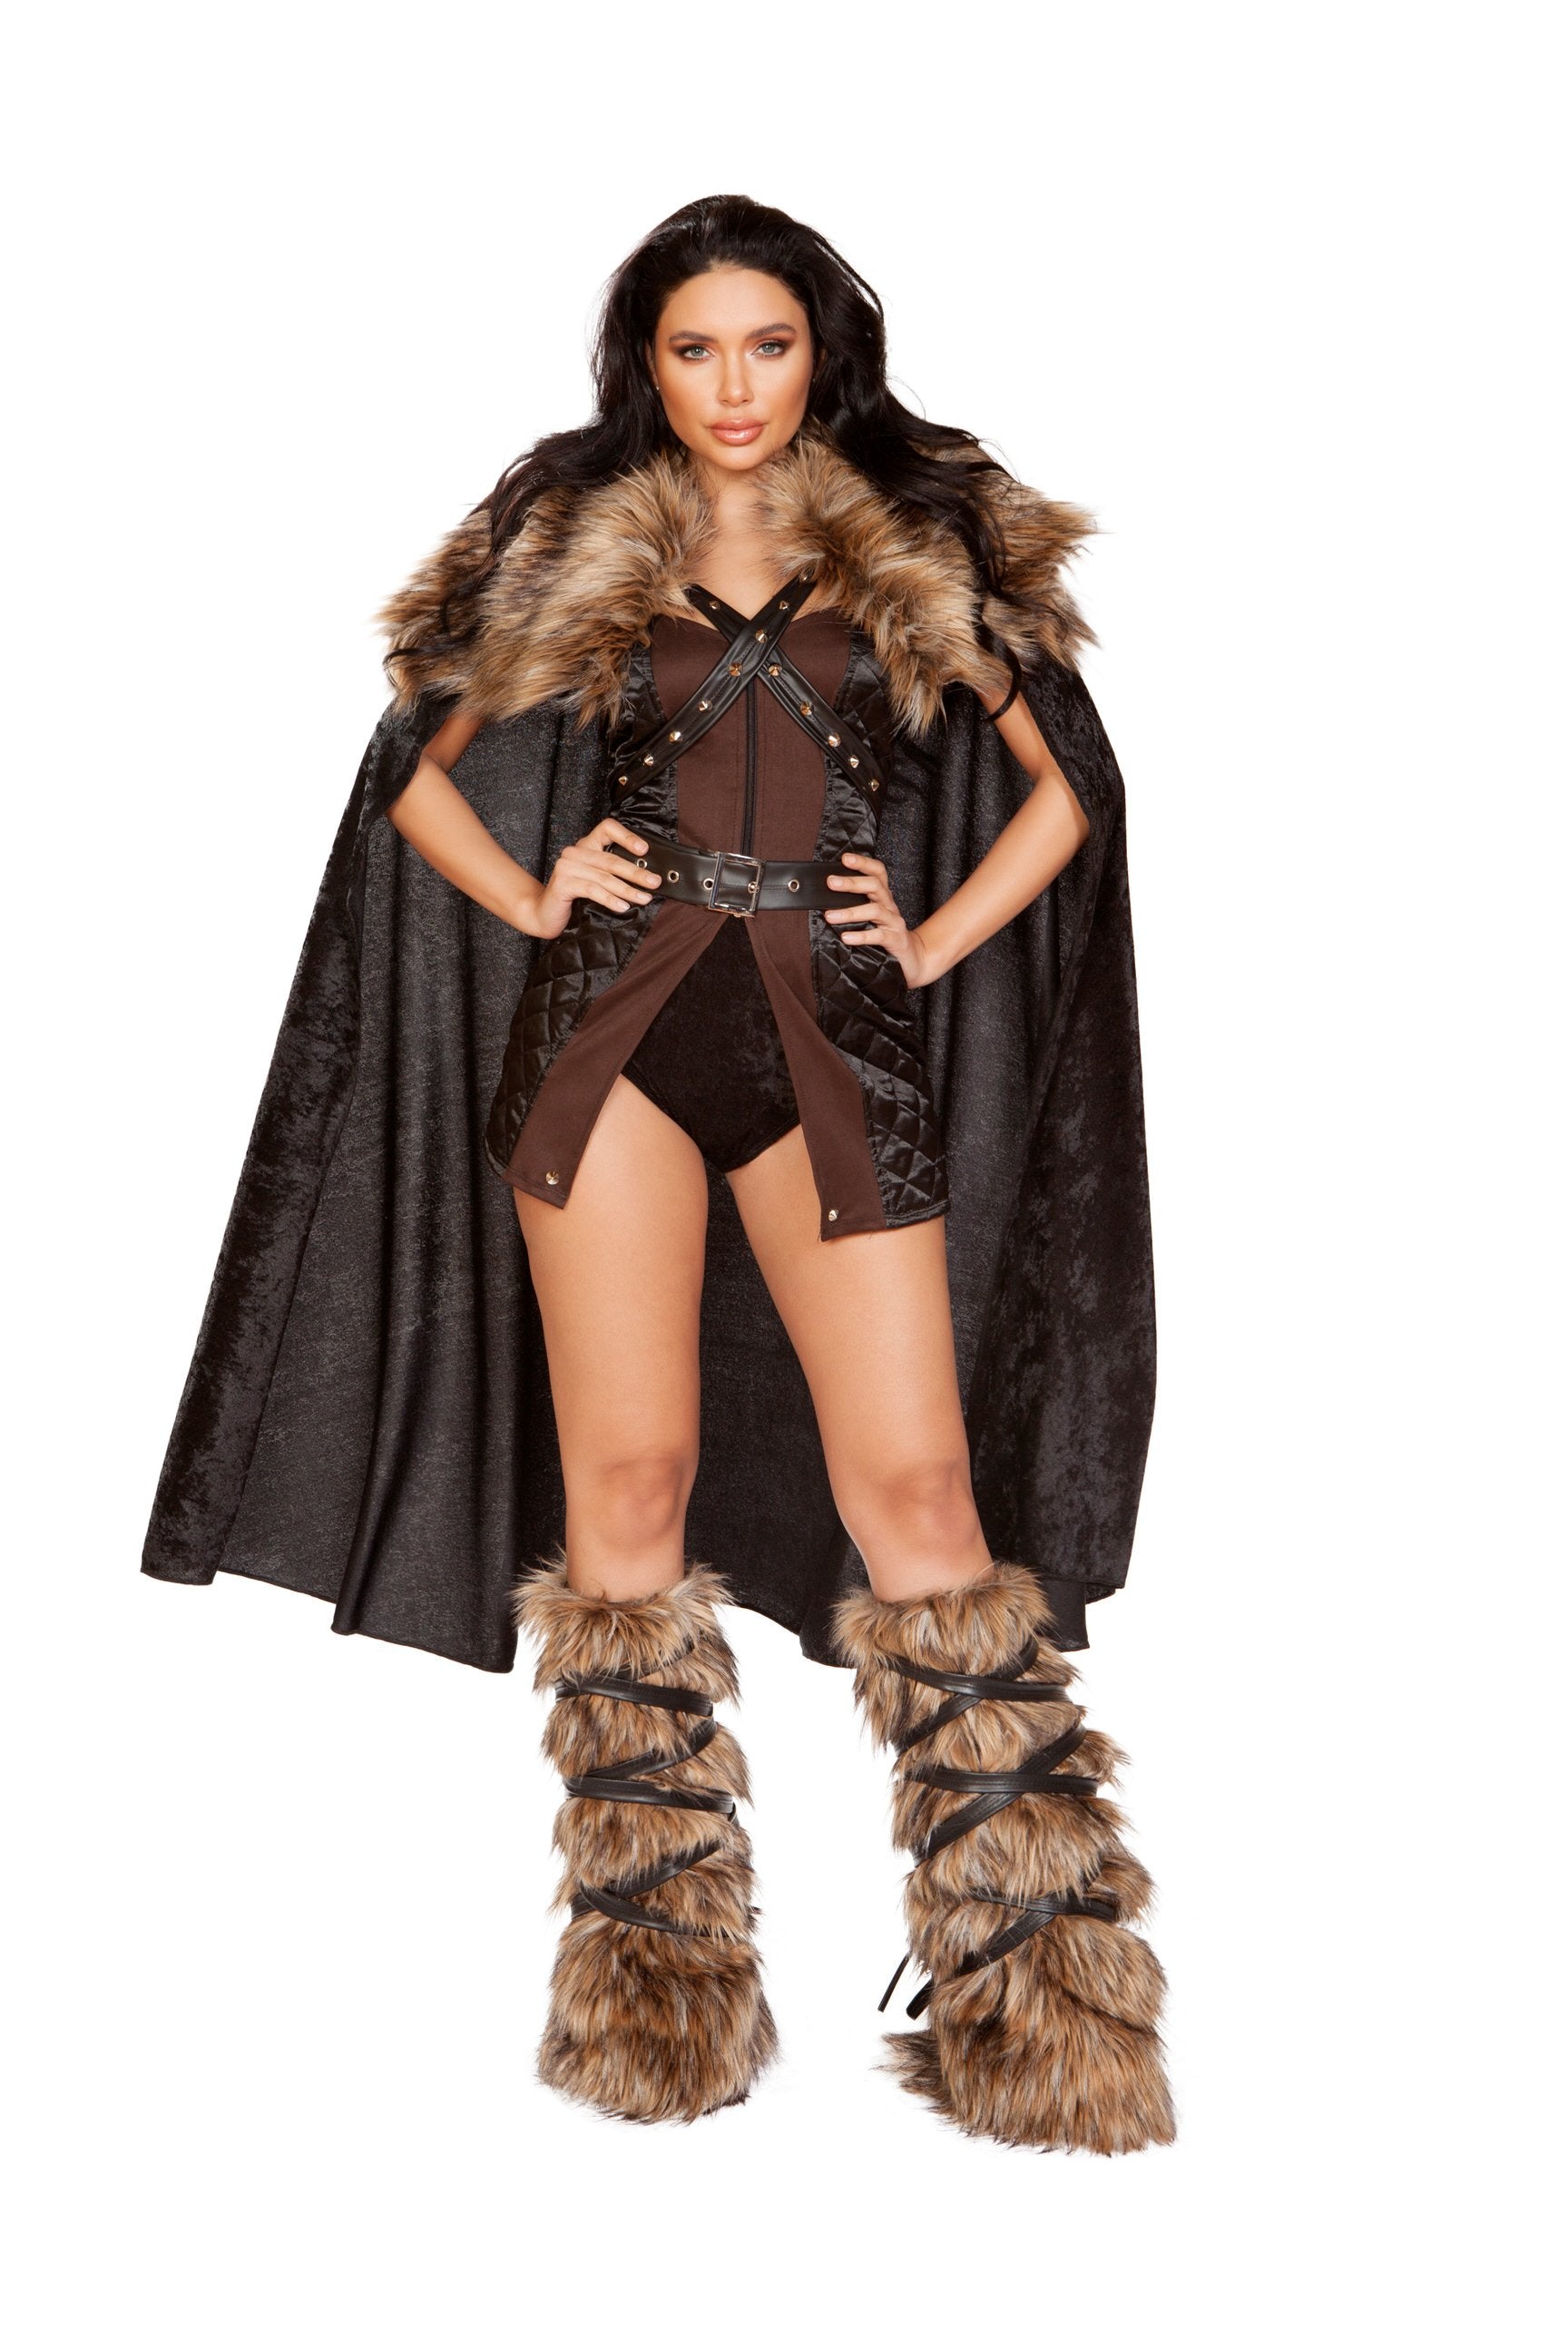 RaveFix 4pc Northern Warrior Includes Front slit Dress with Zipper Closure, Belt, Velvet Shorts, & Cape with Faux Fur Detail and Tie Strap with Stud Accents